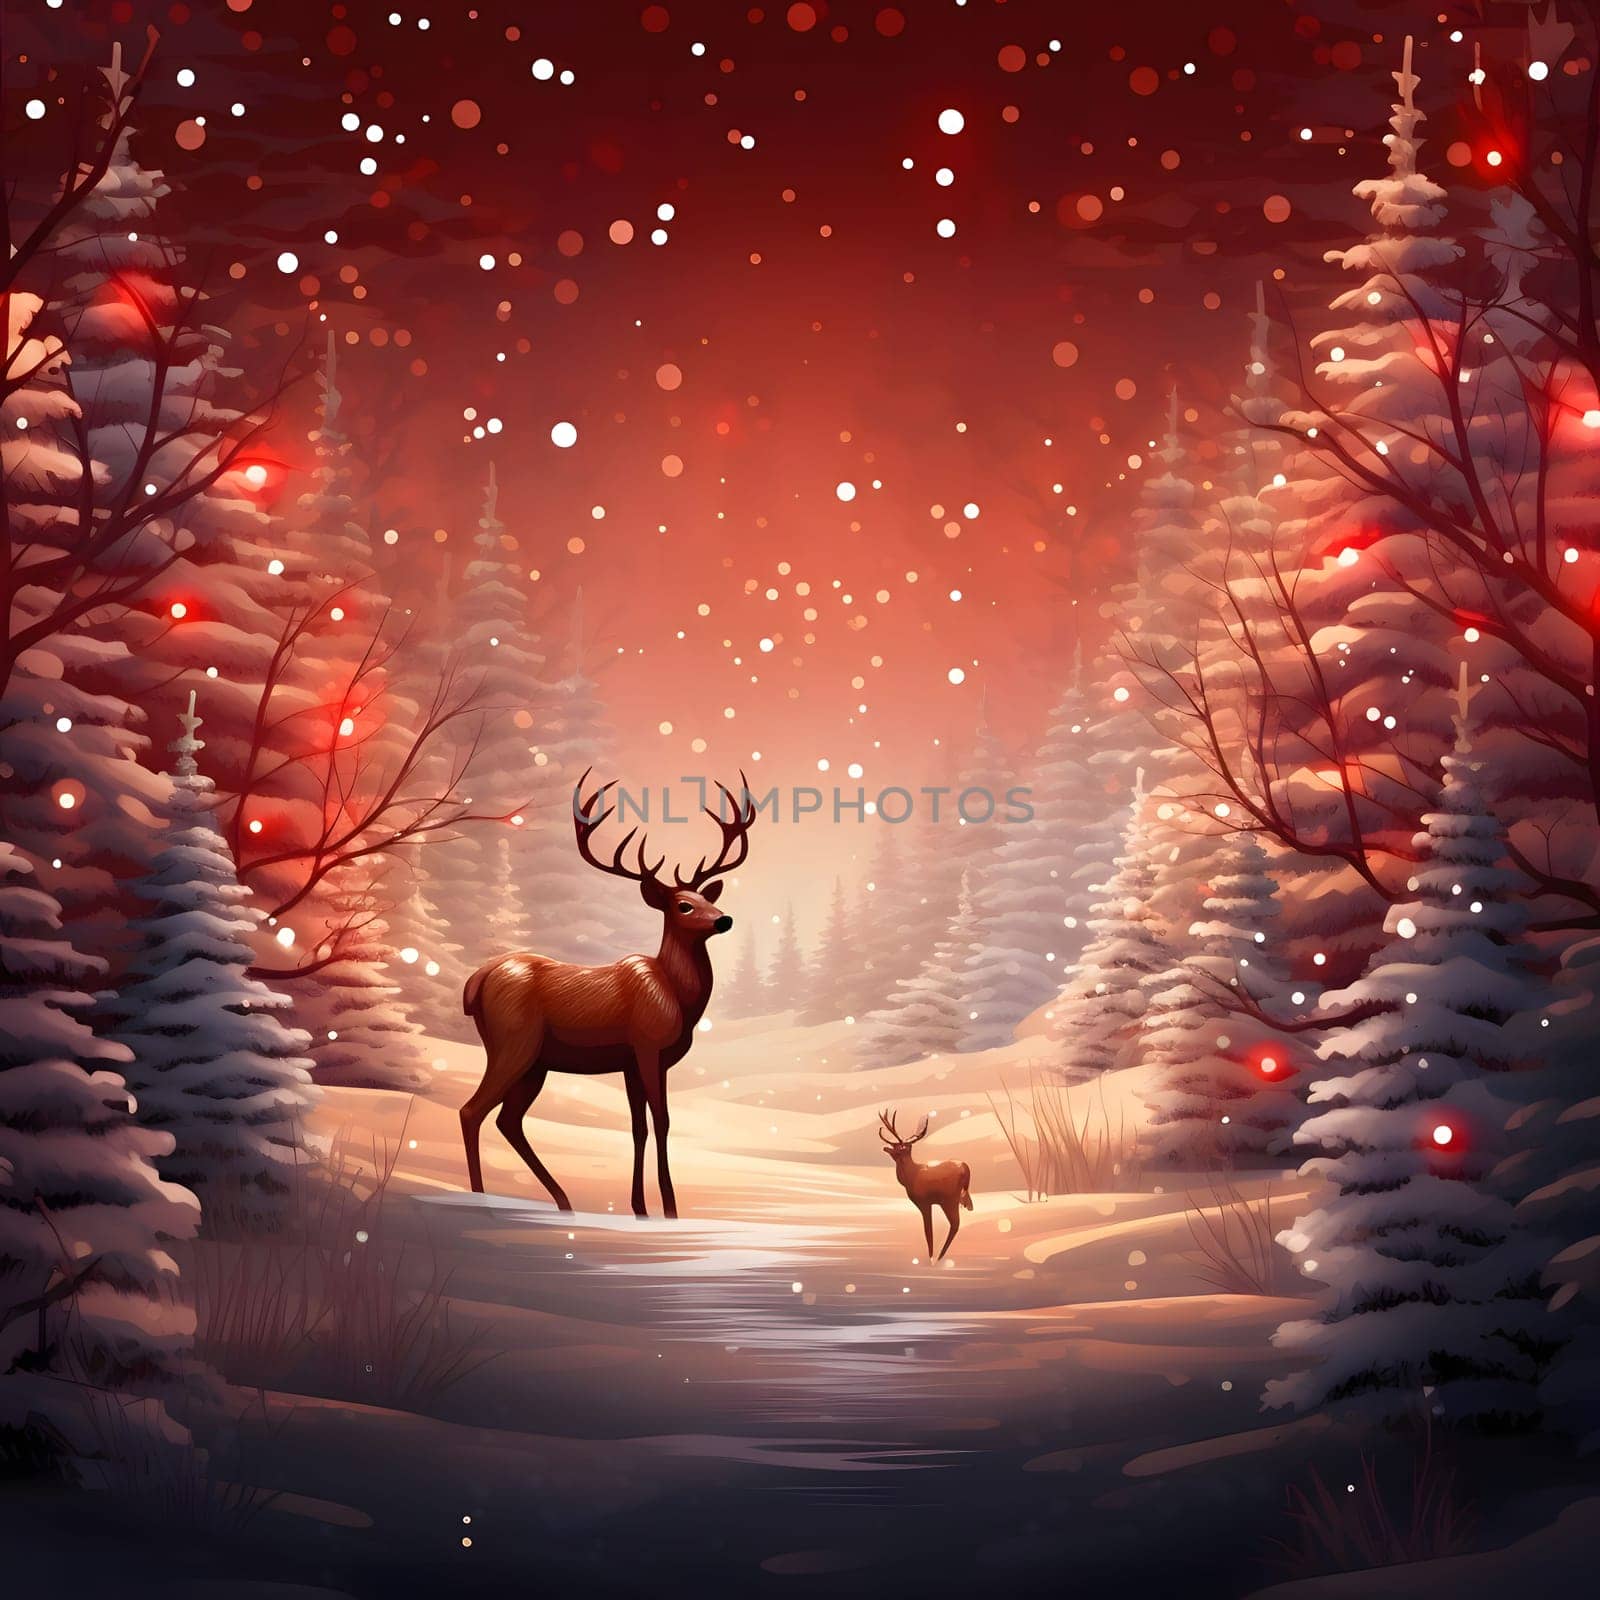 A lone deer in a snow-covered forest at night, illustration. Xmas tree as a symbol of Christmas of the birth of the Savior. A time of joy and celebration.